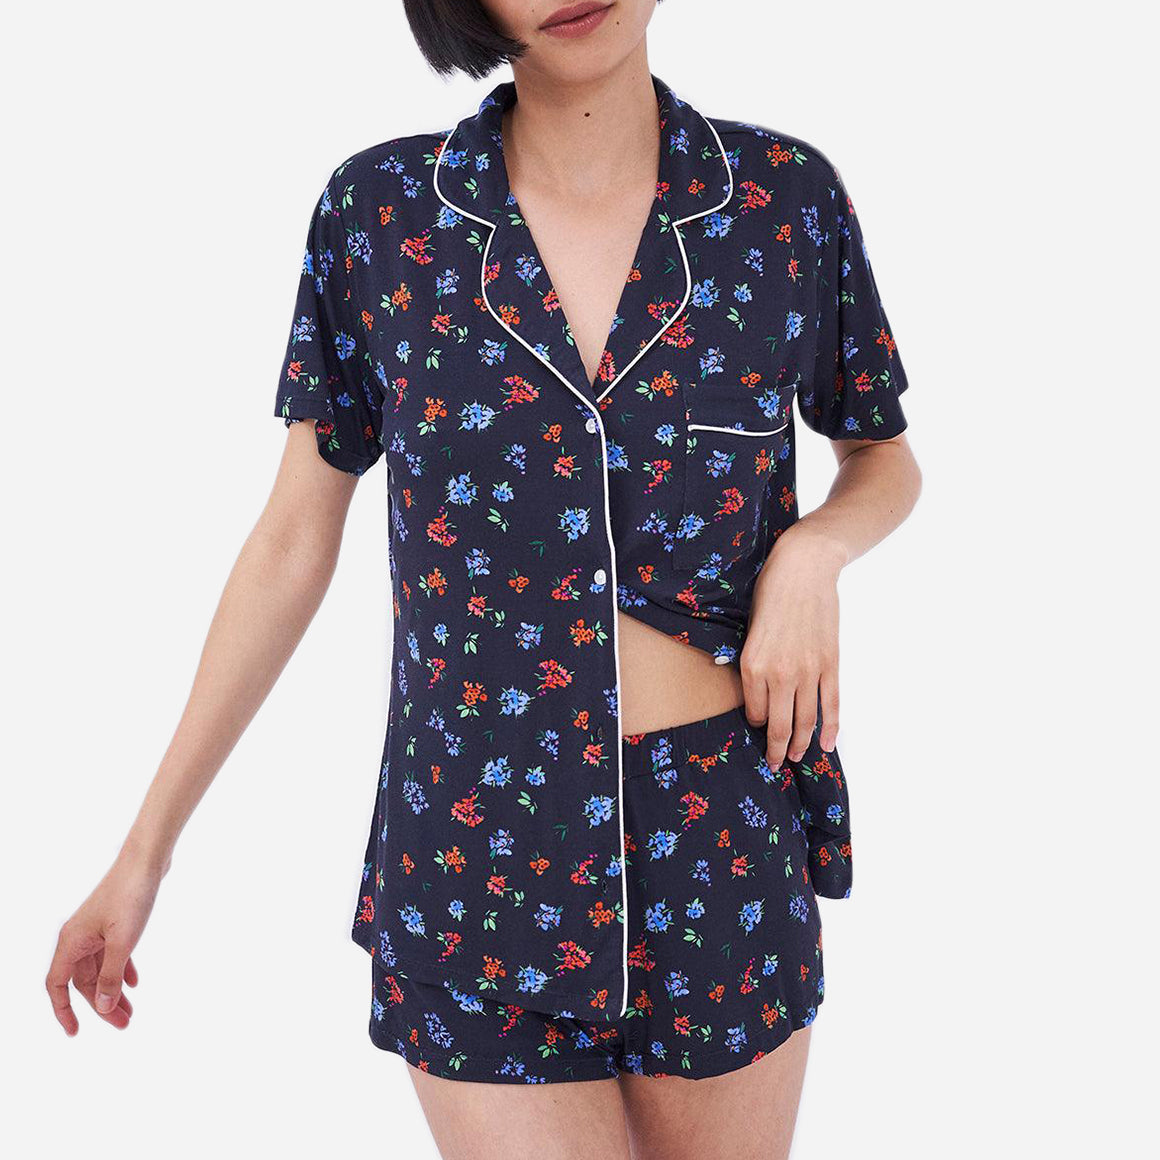 The timeless design of this short pajama set is accentuated by its tailored cut and refined detailing. The button-down front allows for easy wearing and effortless style, while the matching shorts feature an elastic waistband that provides a customized fit.